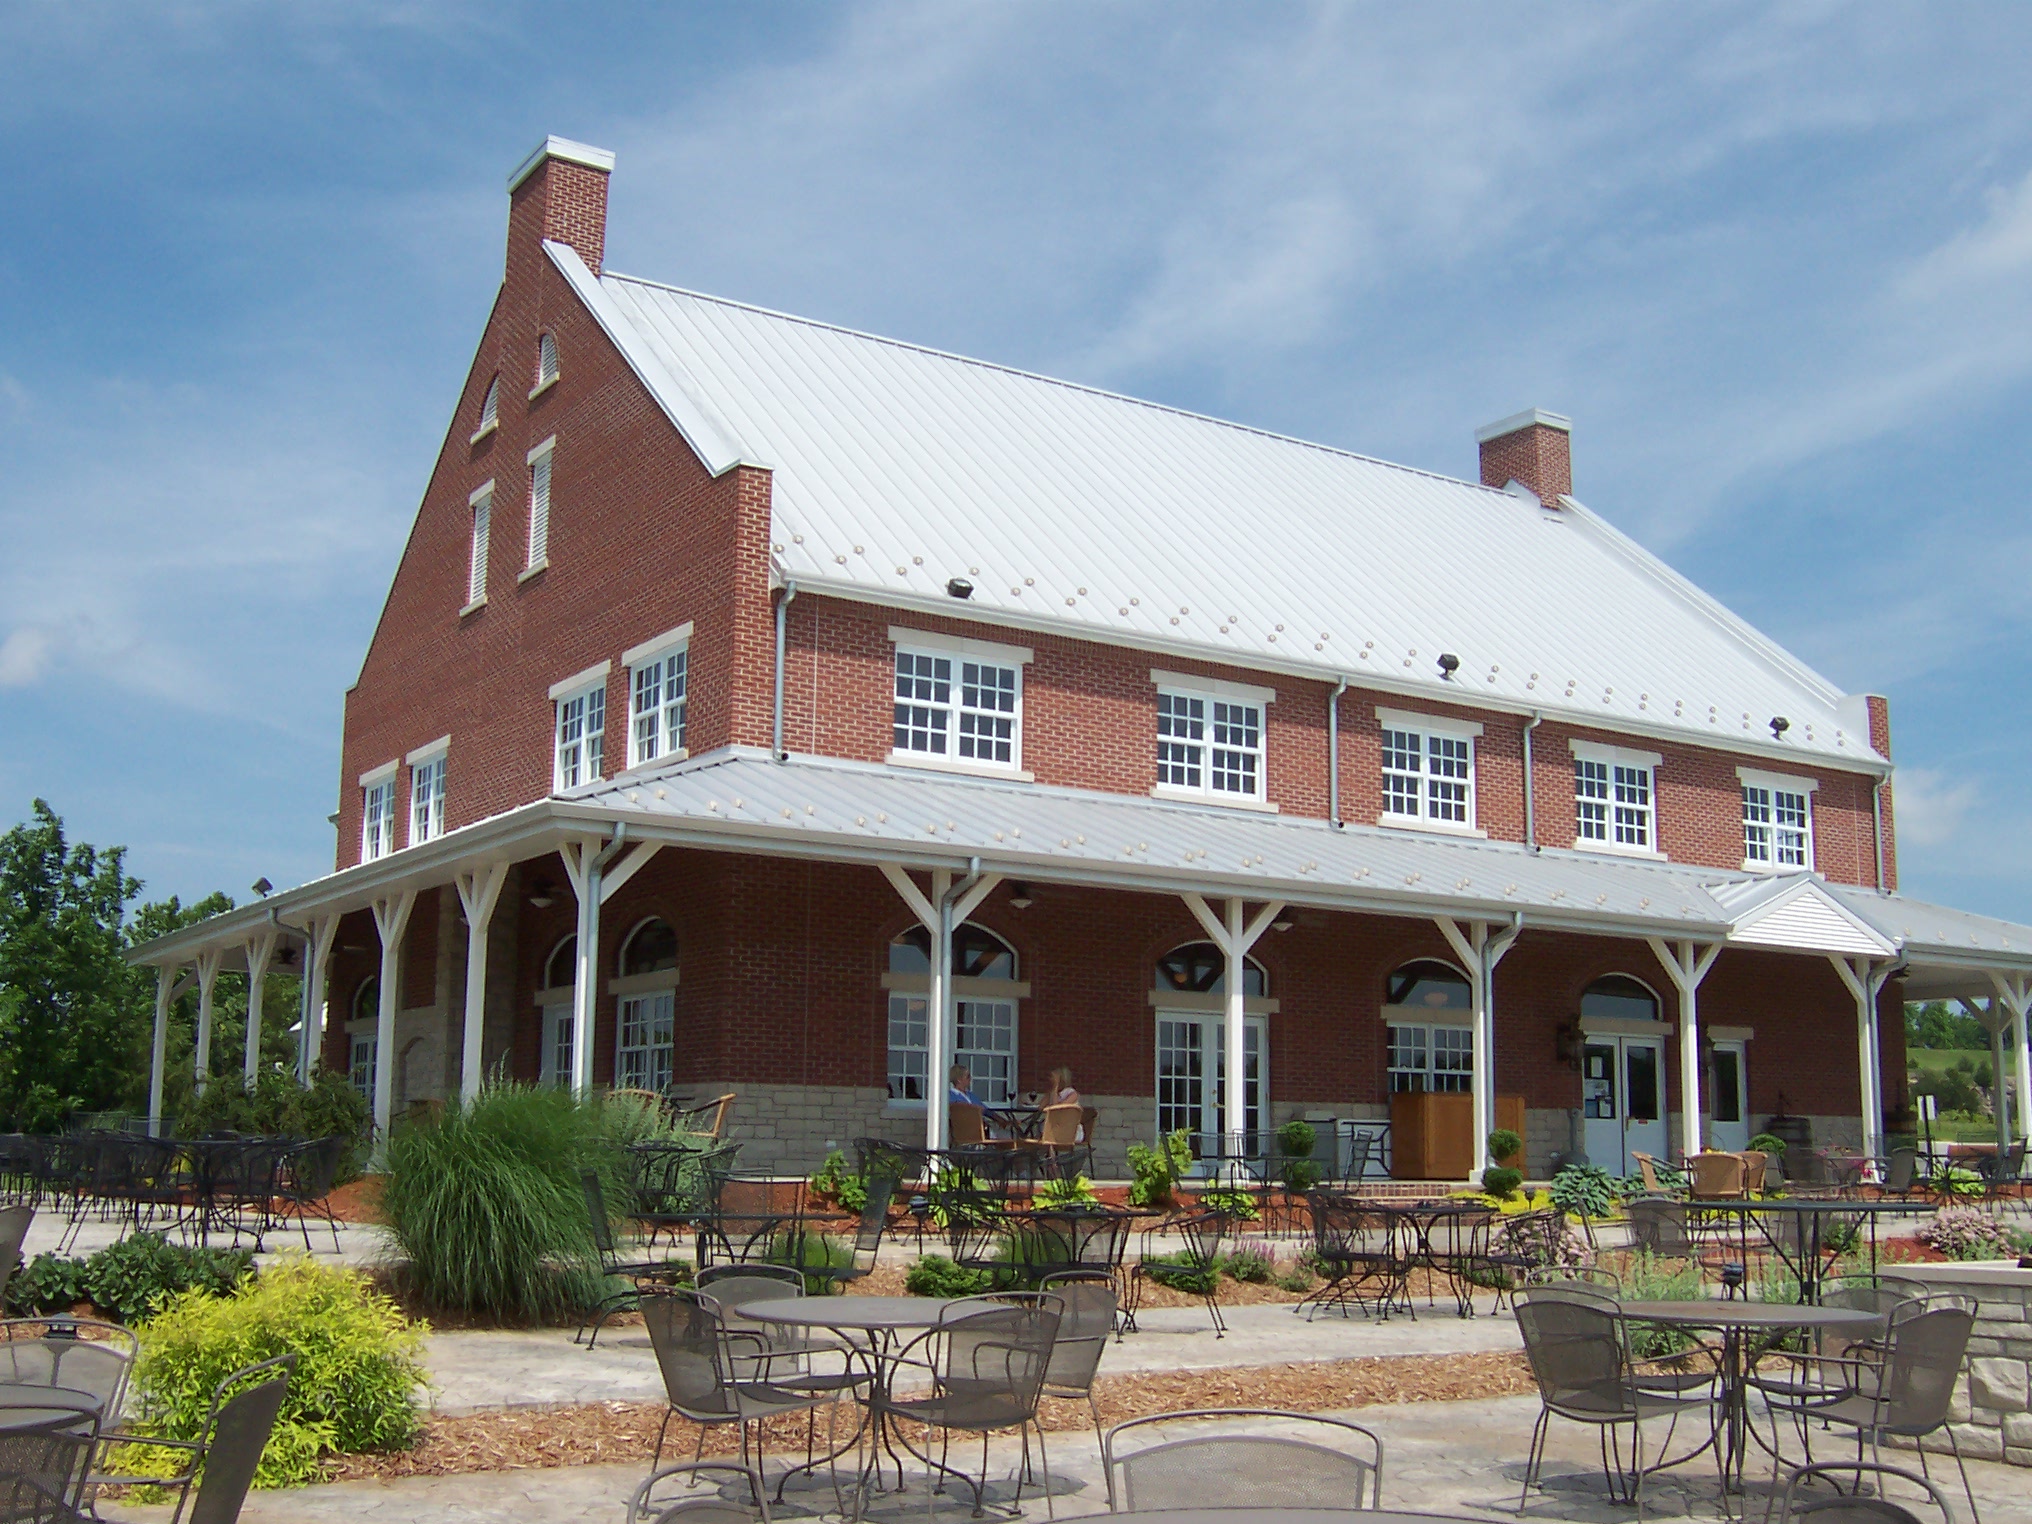 Canterbury Hill Winery and Restaurant - outdoor photo, daytime, of a large building with a white roof. A patio area is visible in the foreground.